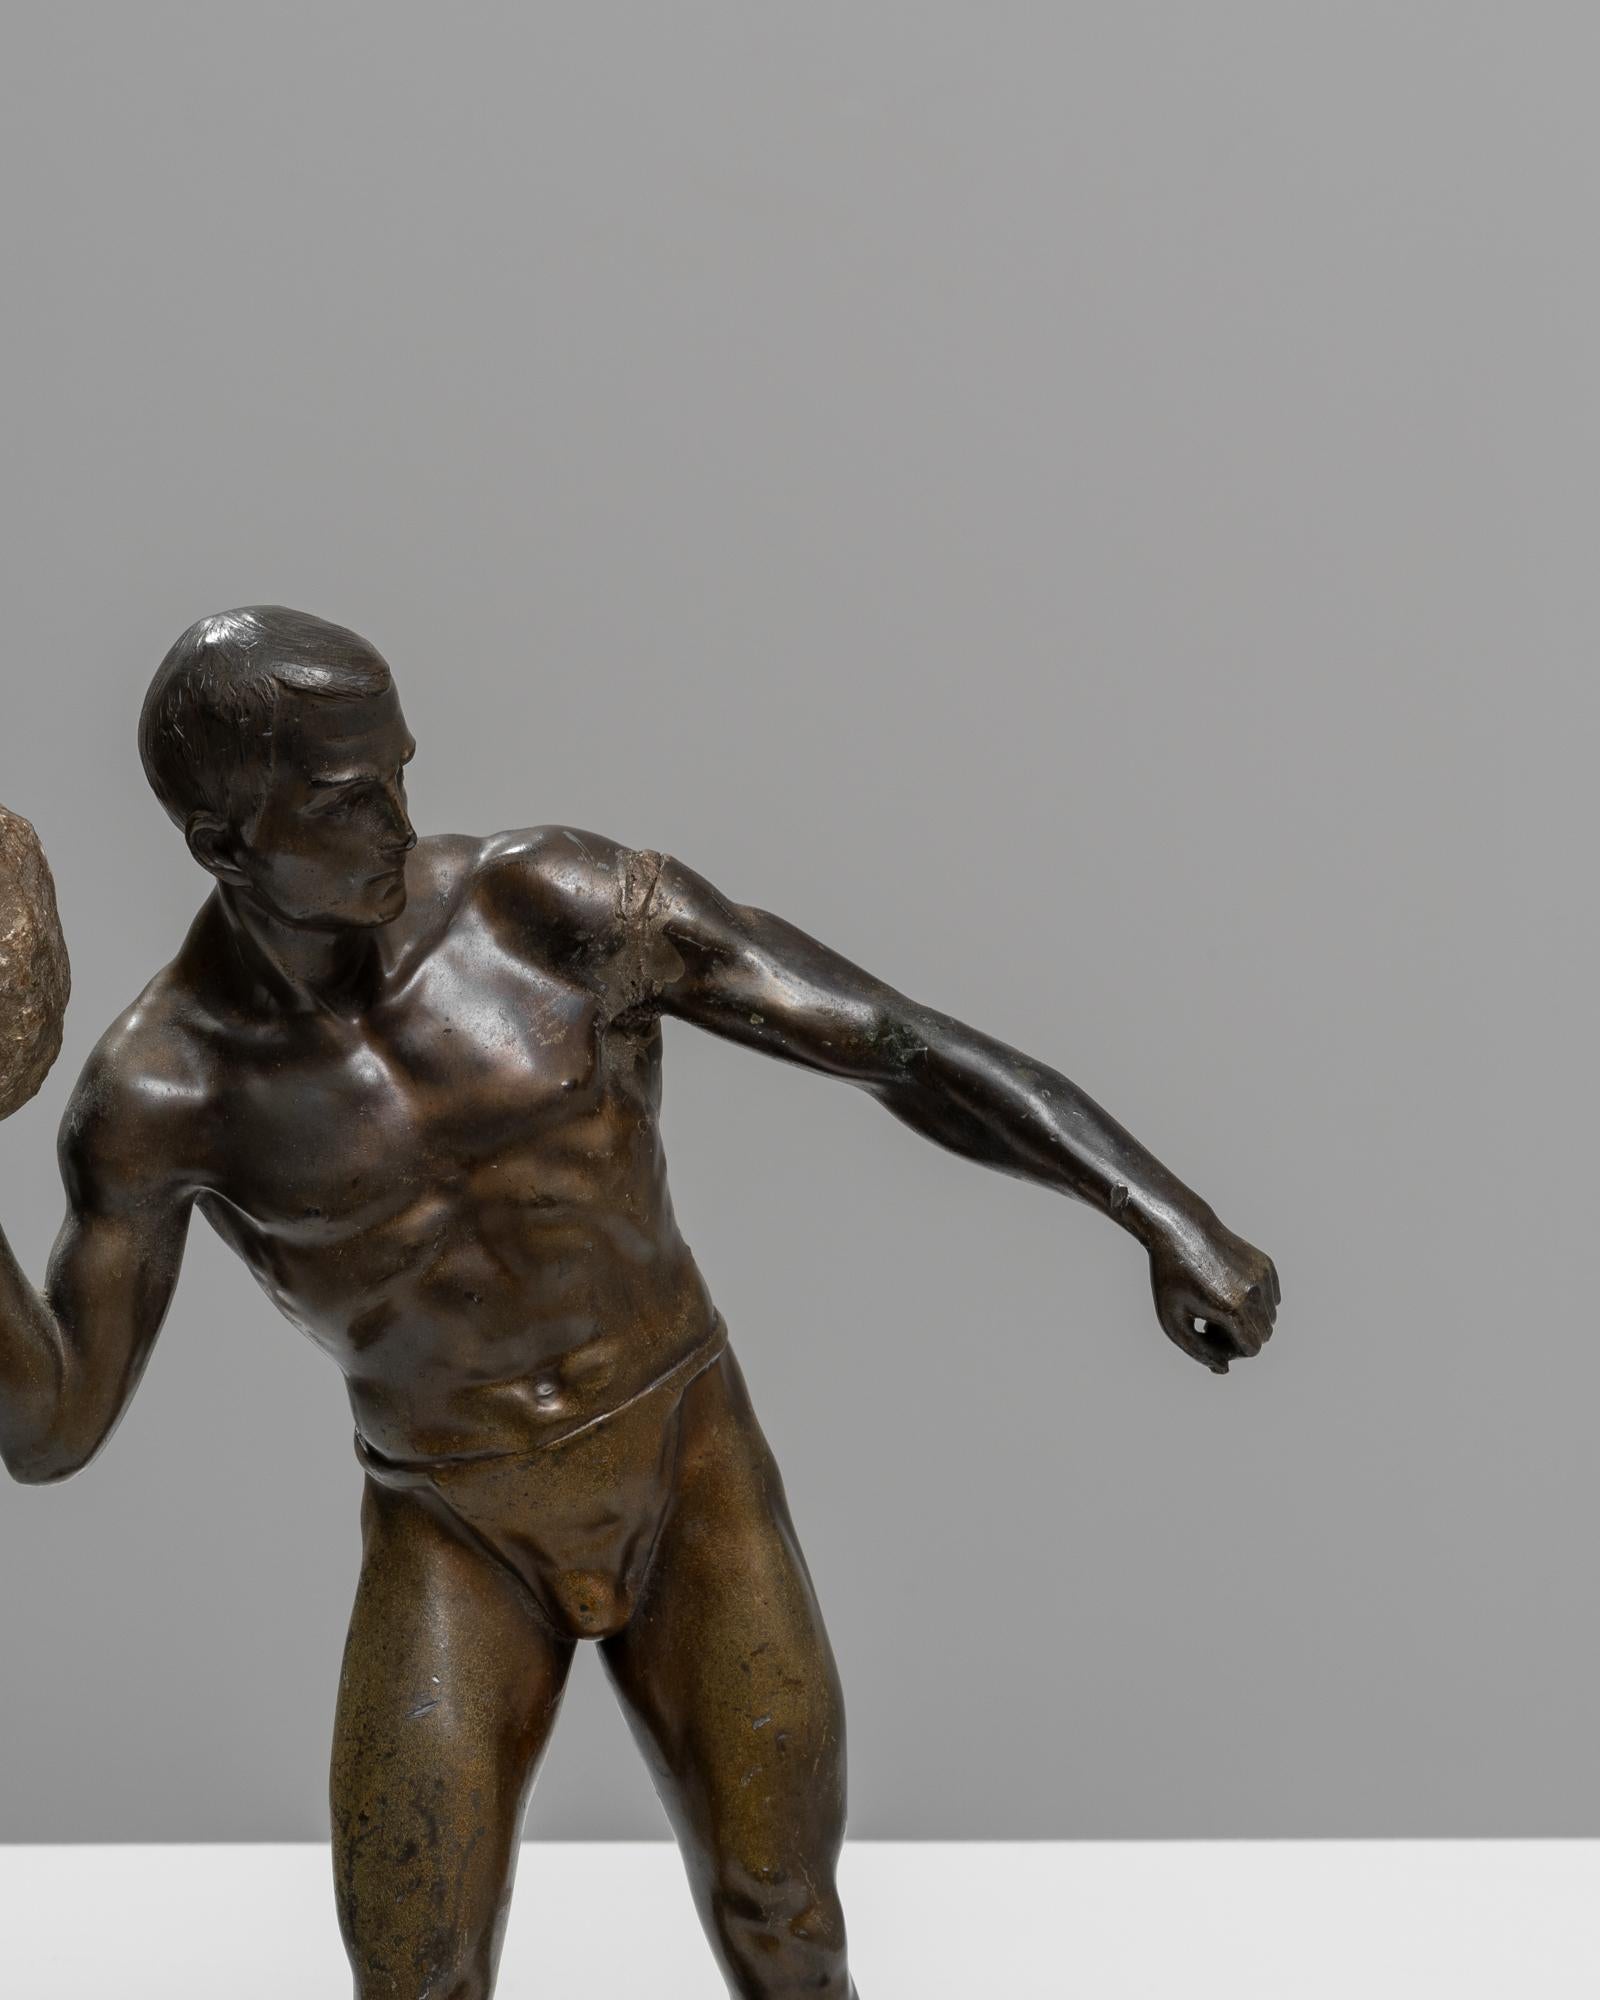 Showcase a piece of dynamic artistry in your space with this early 20th-century bronze sculpture. This striking figure captures a moment of intense action, depicting a muscular male form in mid-throw, wielding a stone with remarkable force and